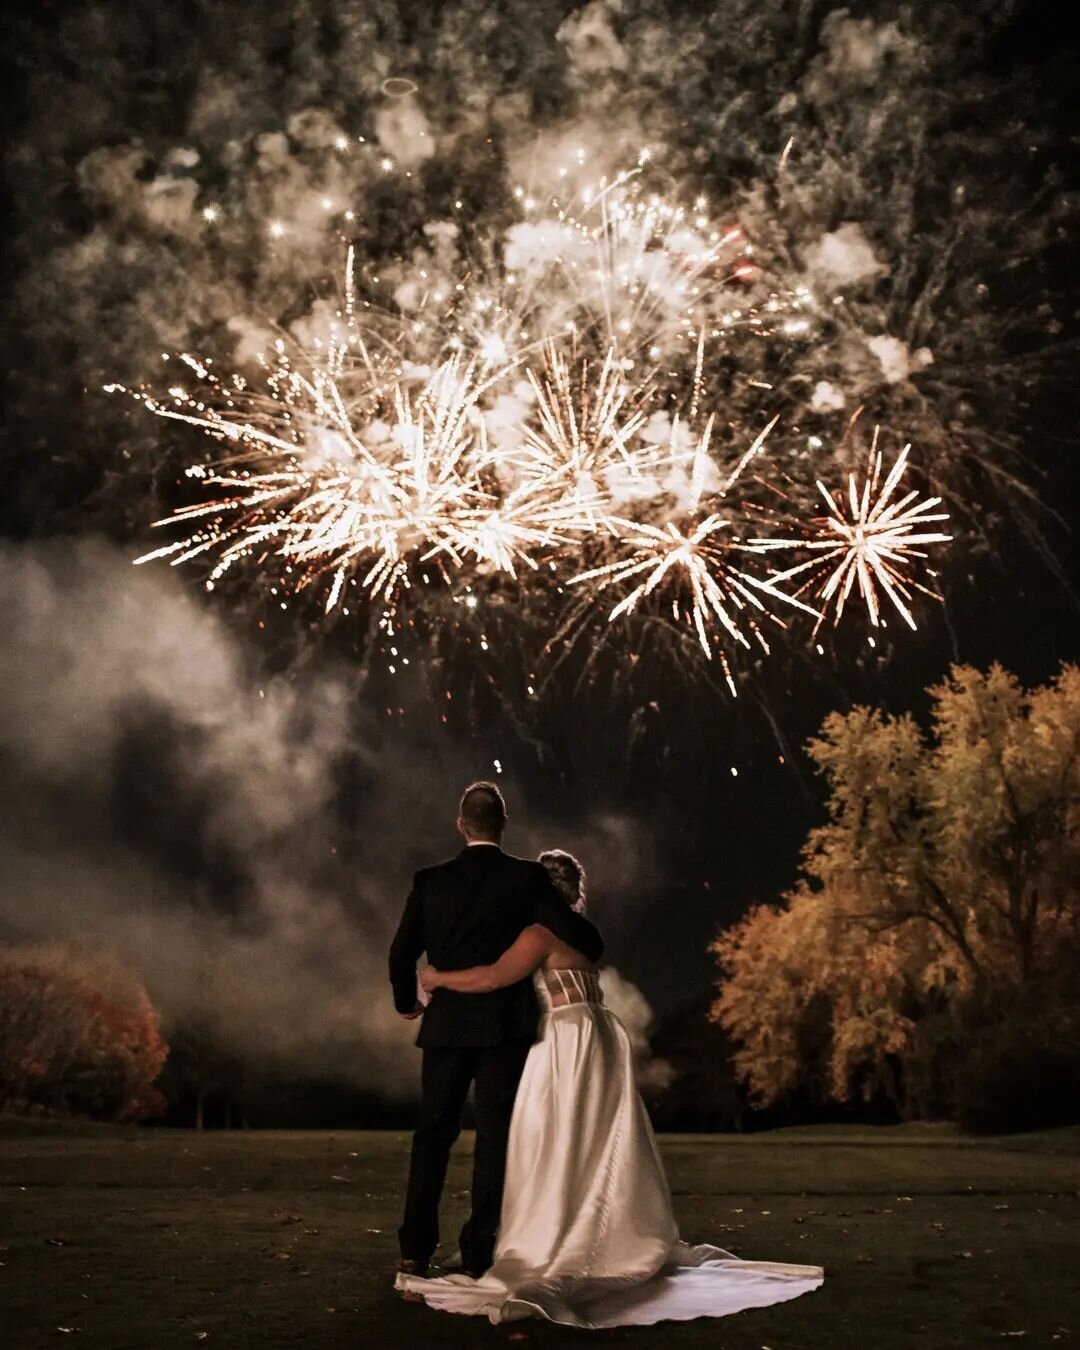 My last wedding of the year quite literally went out with a bang🎆
.
.
.
.
.
.
#meganernstphotography #fireworks #fireworkshow #postthepeople #liveauthentic #loveauthentic #weddingday #weddingthings #reallife #realwedding #authenticlove #weddingwire 